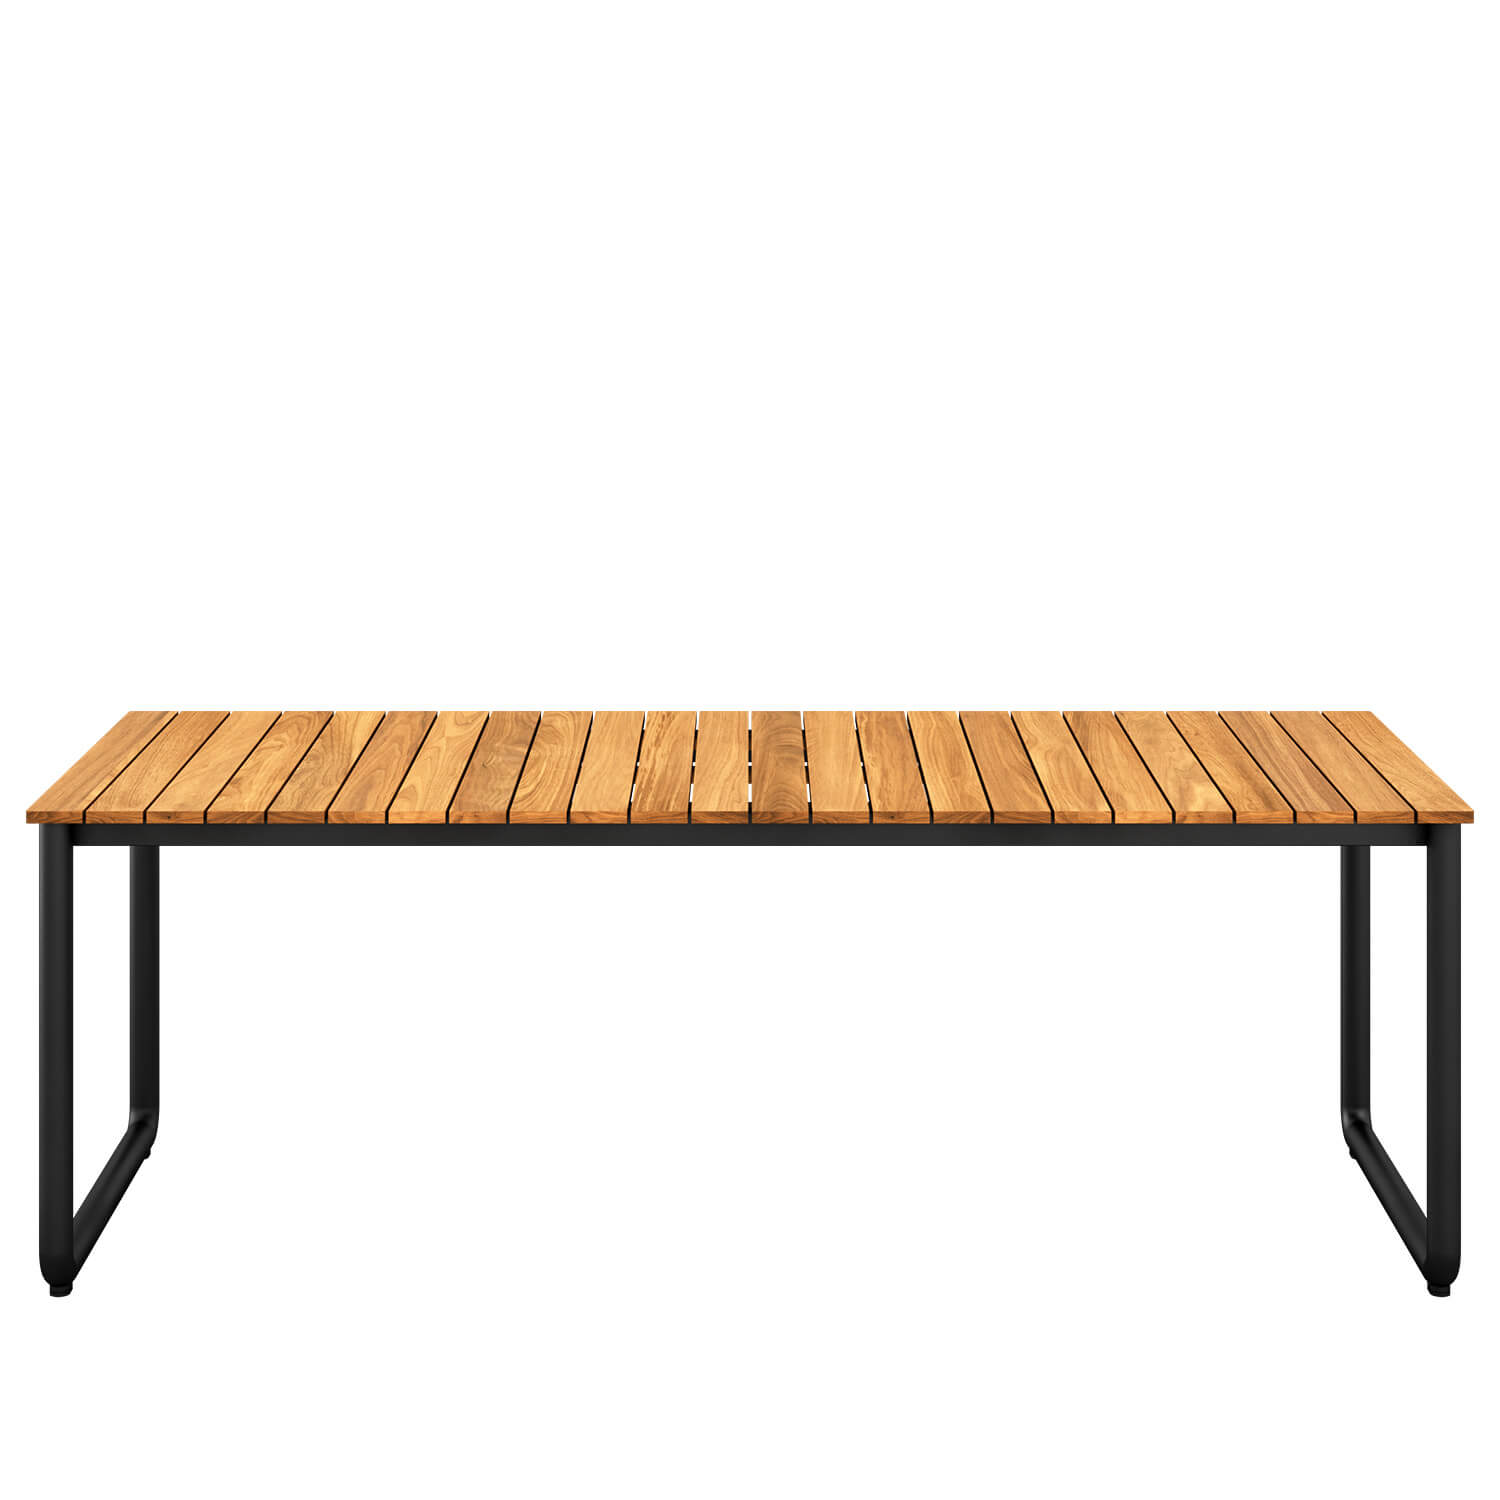 Patio dining table 214x90